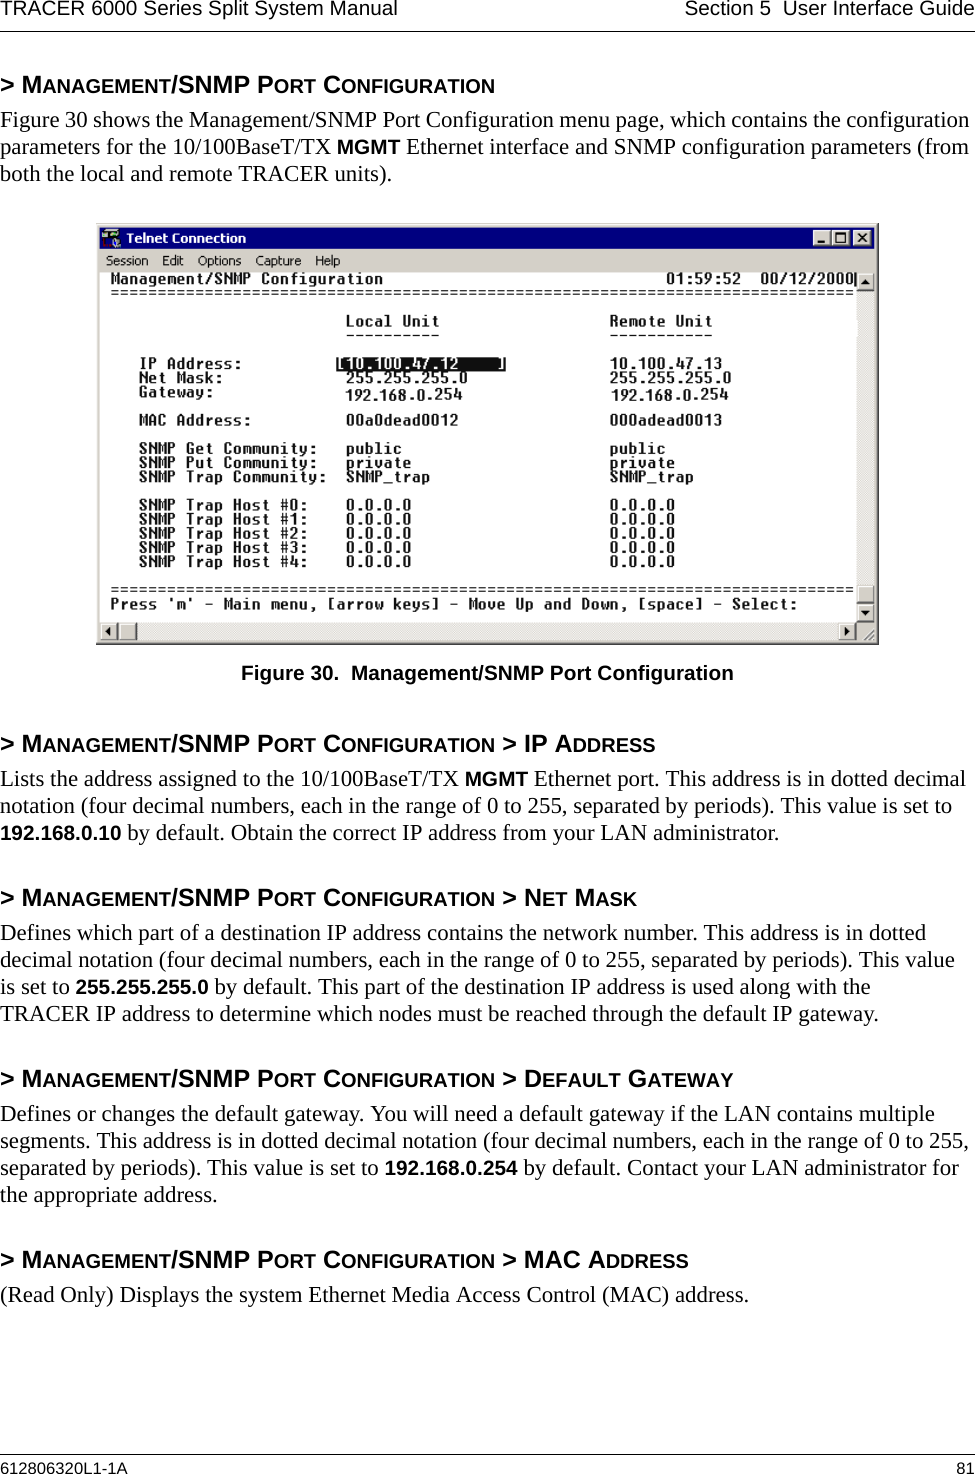 TRACER 6000 Series Split System Manual Section 5  User Interface Guide612806320L1-1A 81&gt; MANAGEMENT/SNMP PORT CONFIGURATIONFigure 30 shows the Management/SNMP Port Configuration menu page, which contains the configuration parameters for the 10/100BaseT/TX MGMT Ethernet interface and SNMP configuration parameters (from both the local and remote TRACER units). Figure 30.  Management/SNMP Port Configuration&gt; MANAGEMENT/SNMP PORT CONFIGURATION &gt; IP ADDRESSLists the address assigned to the 10/100BaseT/TX MGMT Ethernet port. This address is in dotted decimal notation (four decimal numbers, each in the range of 0 to 255, separated by periods). This value is set to 192.168.0.10 by default. Obtain the correct IP address from your LAN administrator.&gt; MANAGEMENT/SNMP PORT CONFIGURATION &gt; NET MASKDefines which part of a destination IP address contains the network number. This address is in dotted decimal notation (four decimal numbers, each in the range of 0 to 255, separated by periods). This value is set to 255.255.255.0 by default. This part of the destination IP address is used along with the TRACER IP address to determine which nodes must be reached through the default IP gateway.&gt; MANAGEMENT/SNMP PORT CONFIGURATION &gt; DEFAULT GATEWAYDefines or changes the default gateway. You will need a default gateway if the LAN contains multiple segments. This address is in dotted decimal notation (four decimal numbers, each in the range of 0 to 255, separated by periods). This value is set to 192.168.0.254 by default. Contact your LAN administrator for the appropriate address.&gt; MANAGEMENT/SNMP PORT CONFIGURATION &gt; MAC ADDRESS(Read Only) Displays the system Ethernet Media Access Control (MAC) address.